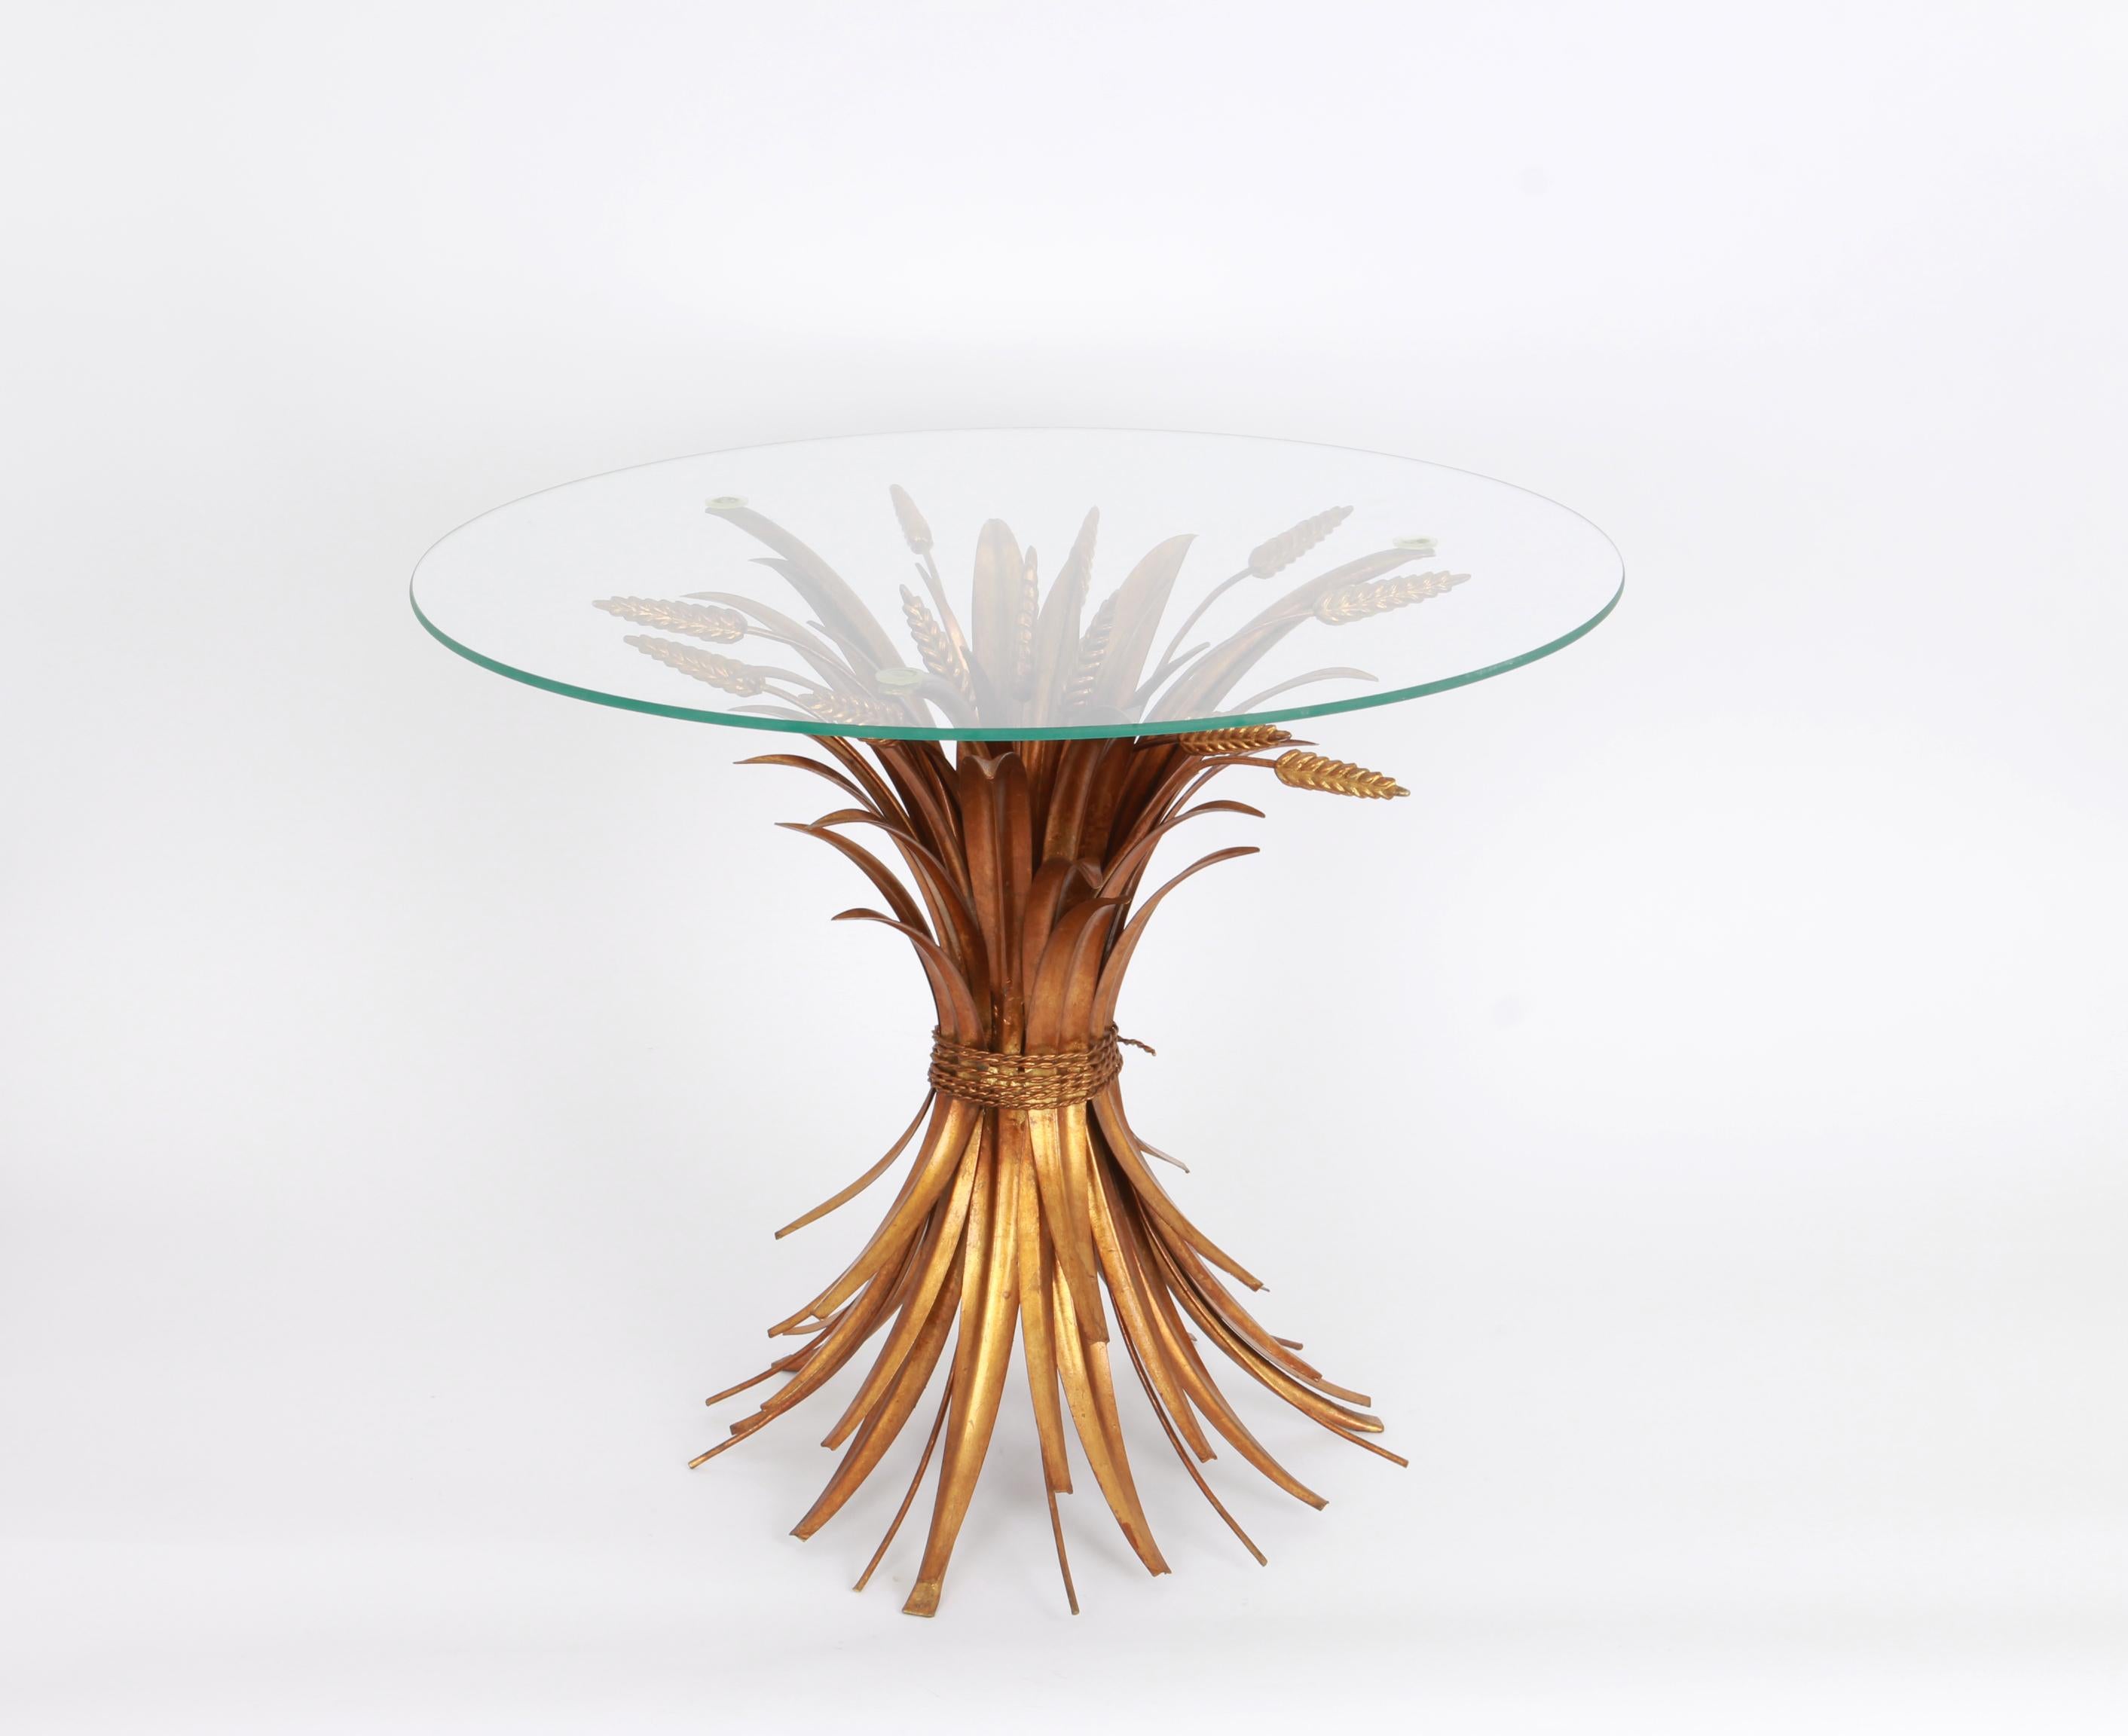 Set of 2 Regency gilt palm tree and wheat coffee table by Hans Kögl, 1970s
Set of 2 side tables produced in Italy in the 1970s for Hans Koegl.
Structure handmade of gold-plated metal in form of palm tree leaves and wheat, circular top made of